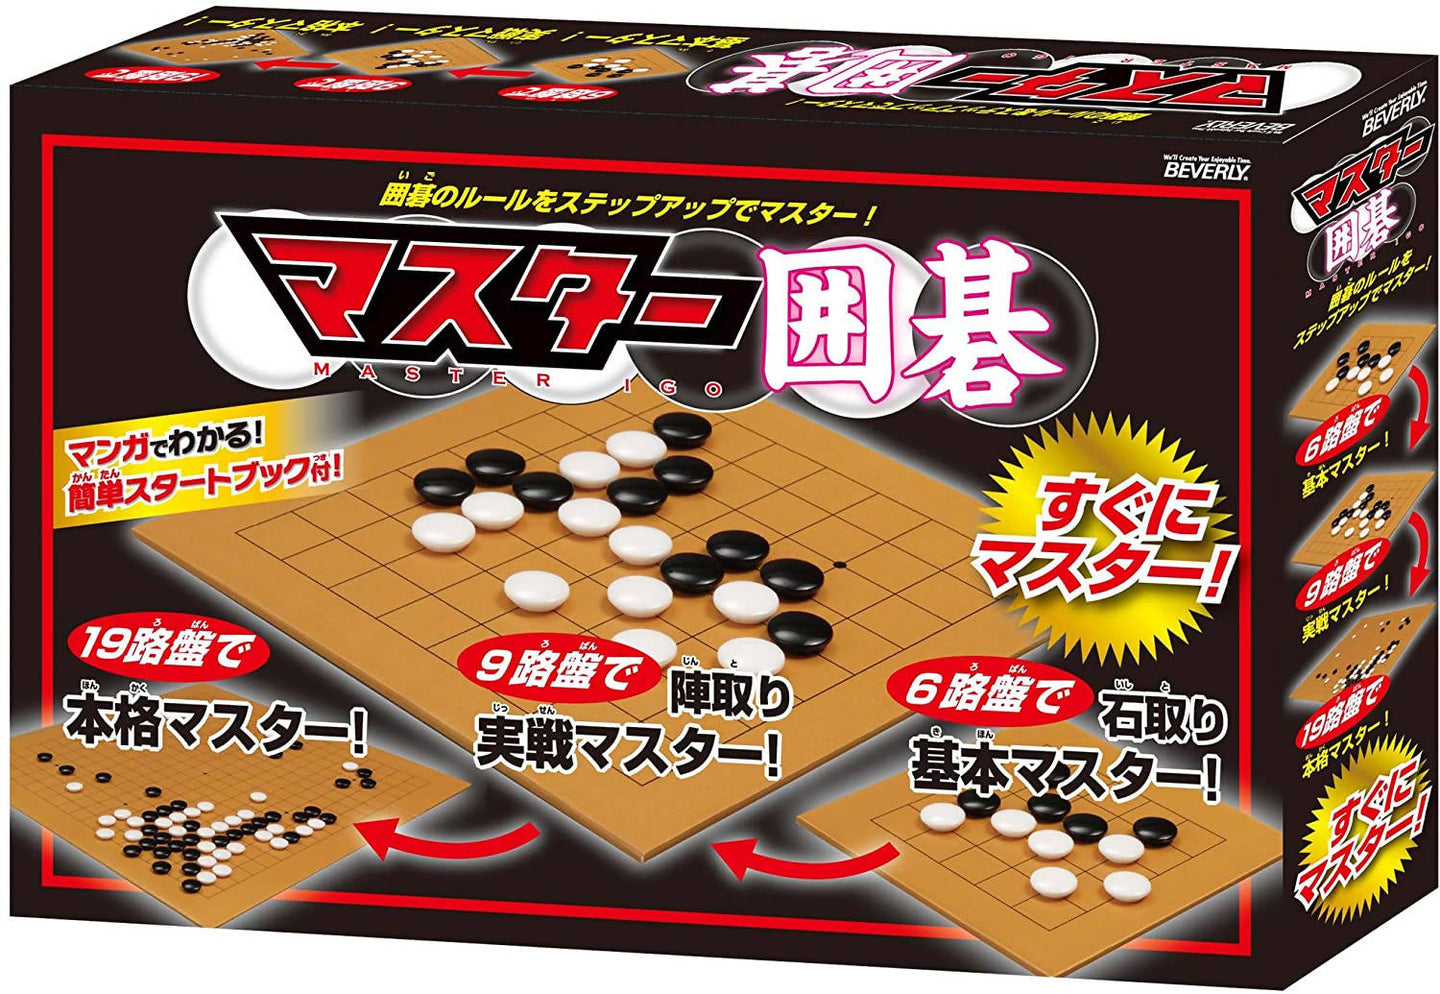 BEVERLY 3-Step Beginners Go Board Set – 6, 9, 19 Grid Boards for Easy Learning – Shipped Directly from Japan